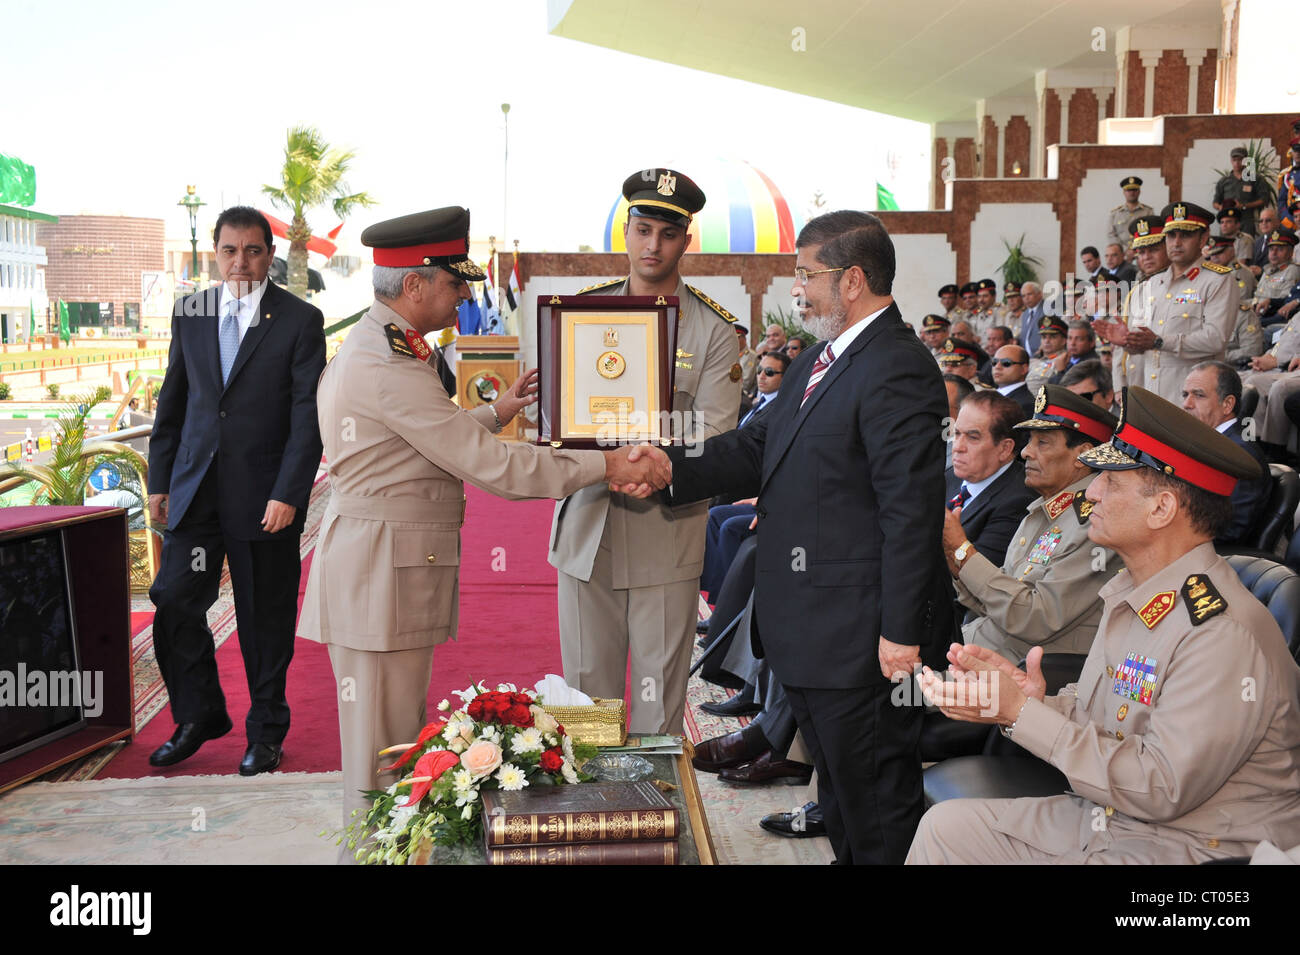 Egypt's President Morsi attends Civil Aviation graduation cermonies with Military head Hussein Tantawi and other senior figures. Stock Photo